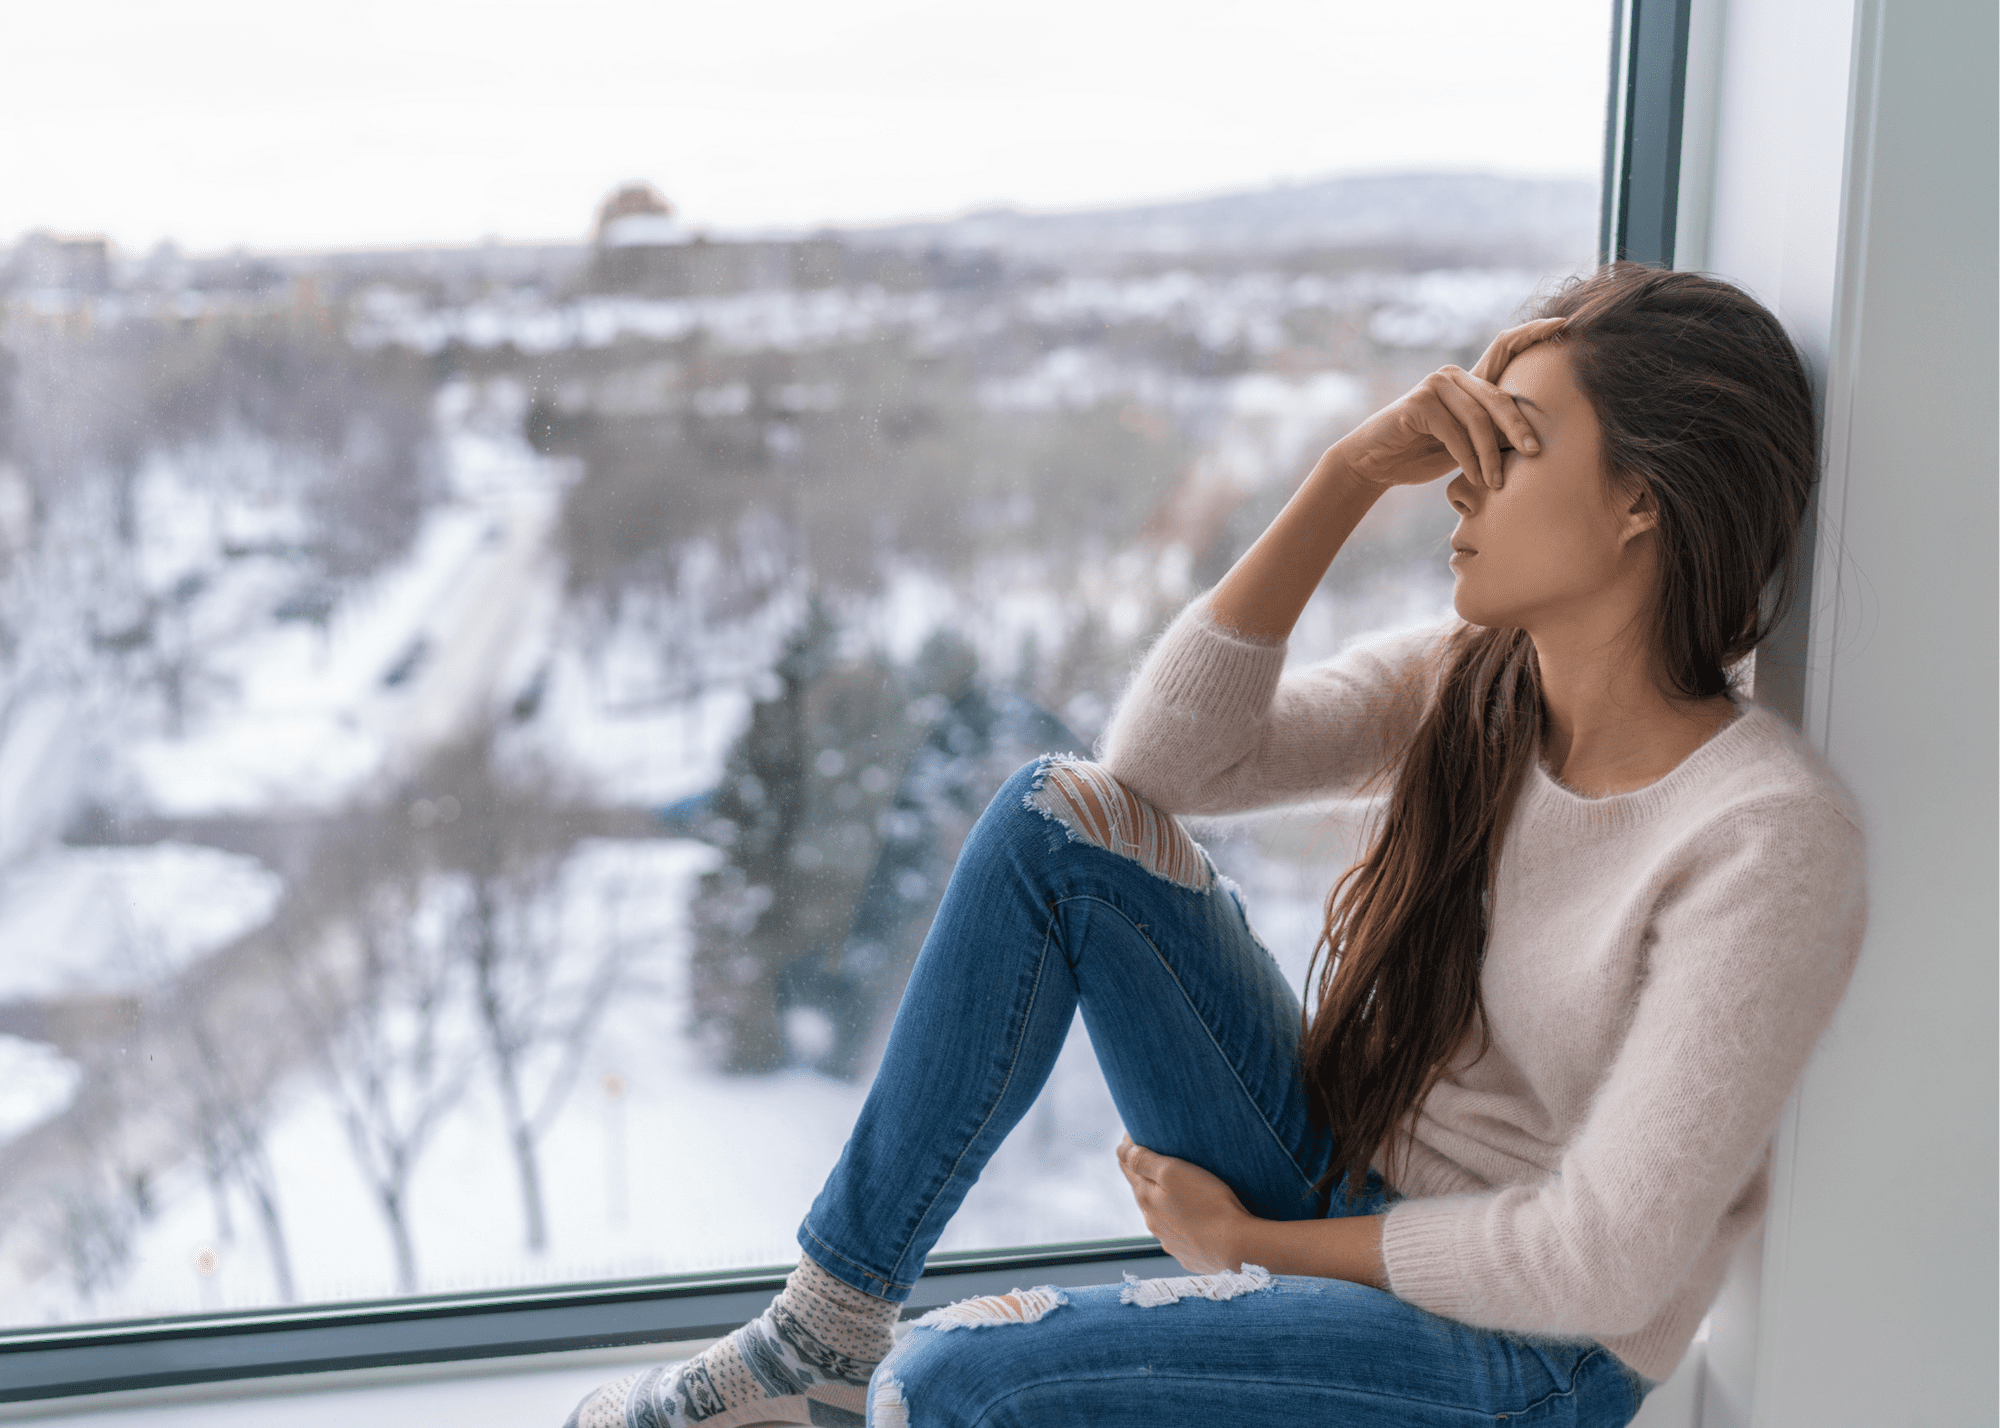 Chasing Mental Wellness During Winter